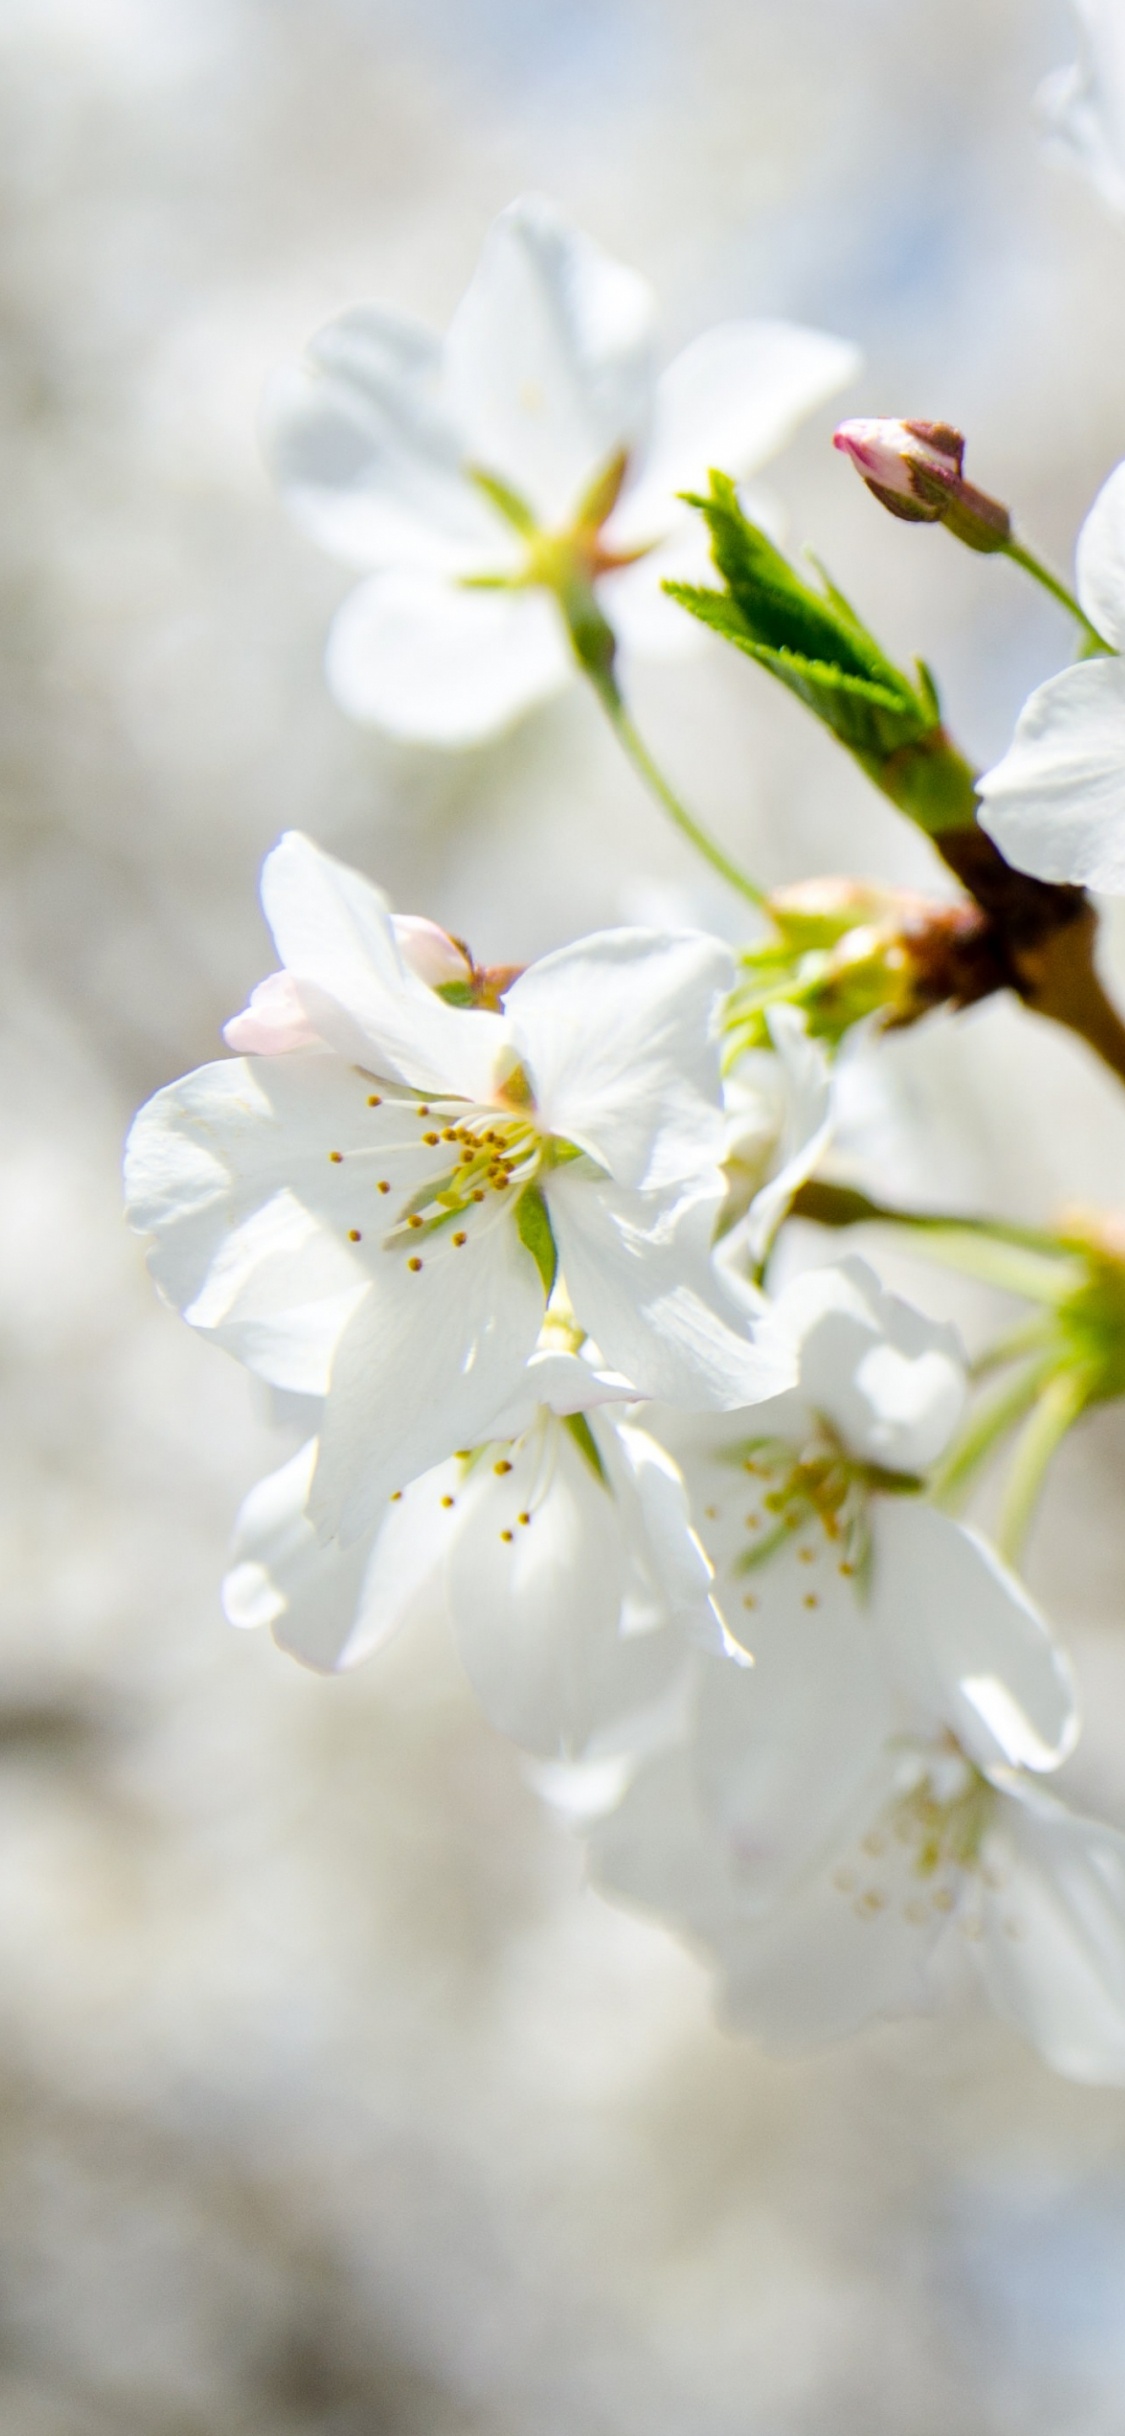 White Cherry Blossom in Close up Photography. Wallpaper in 1125x2436 Resolution